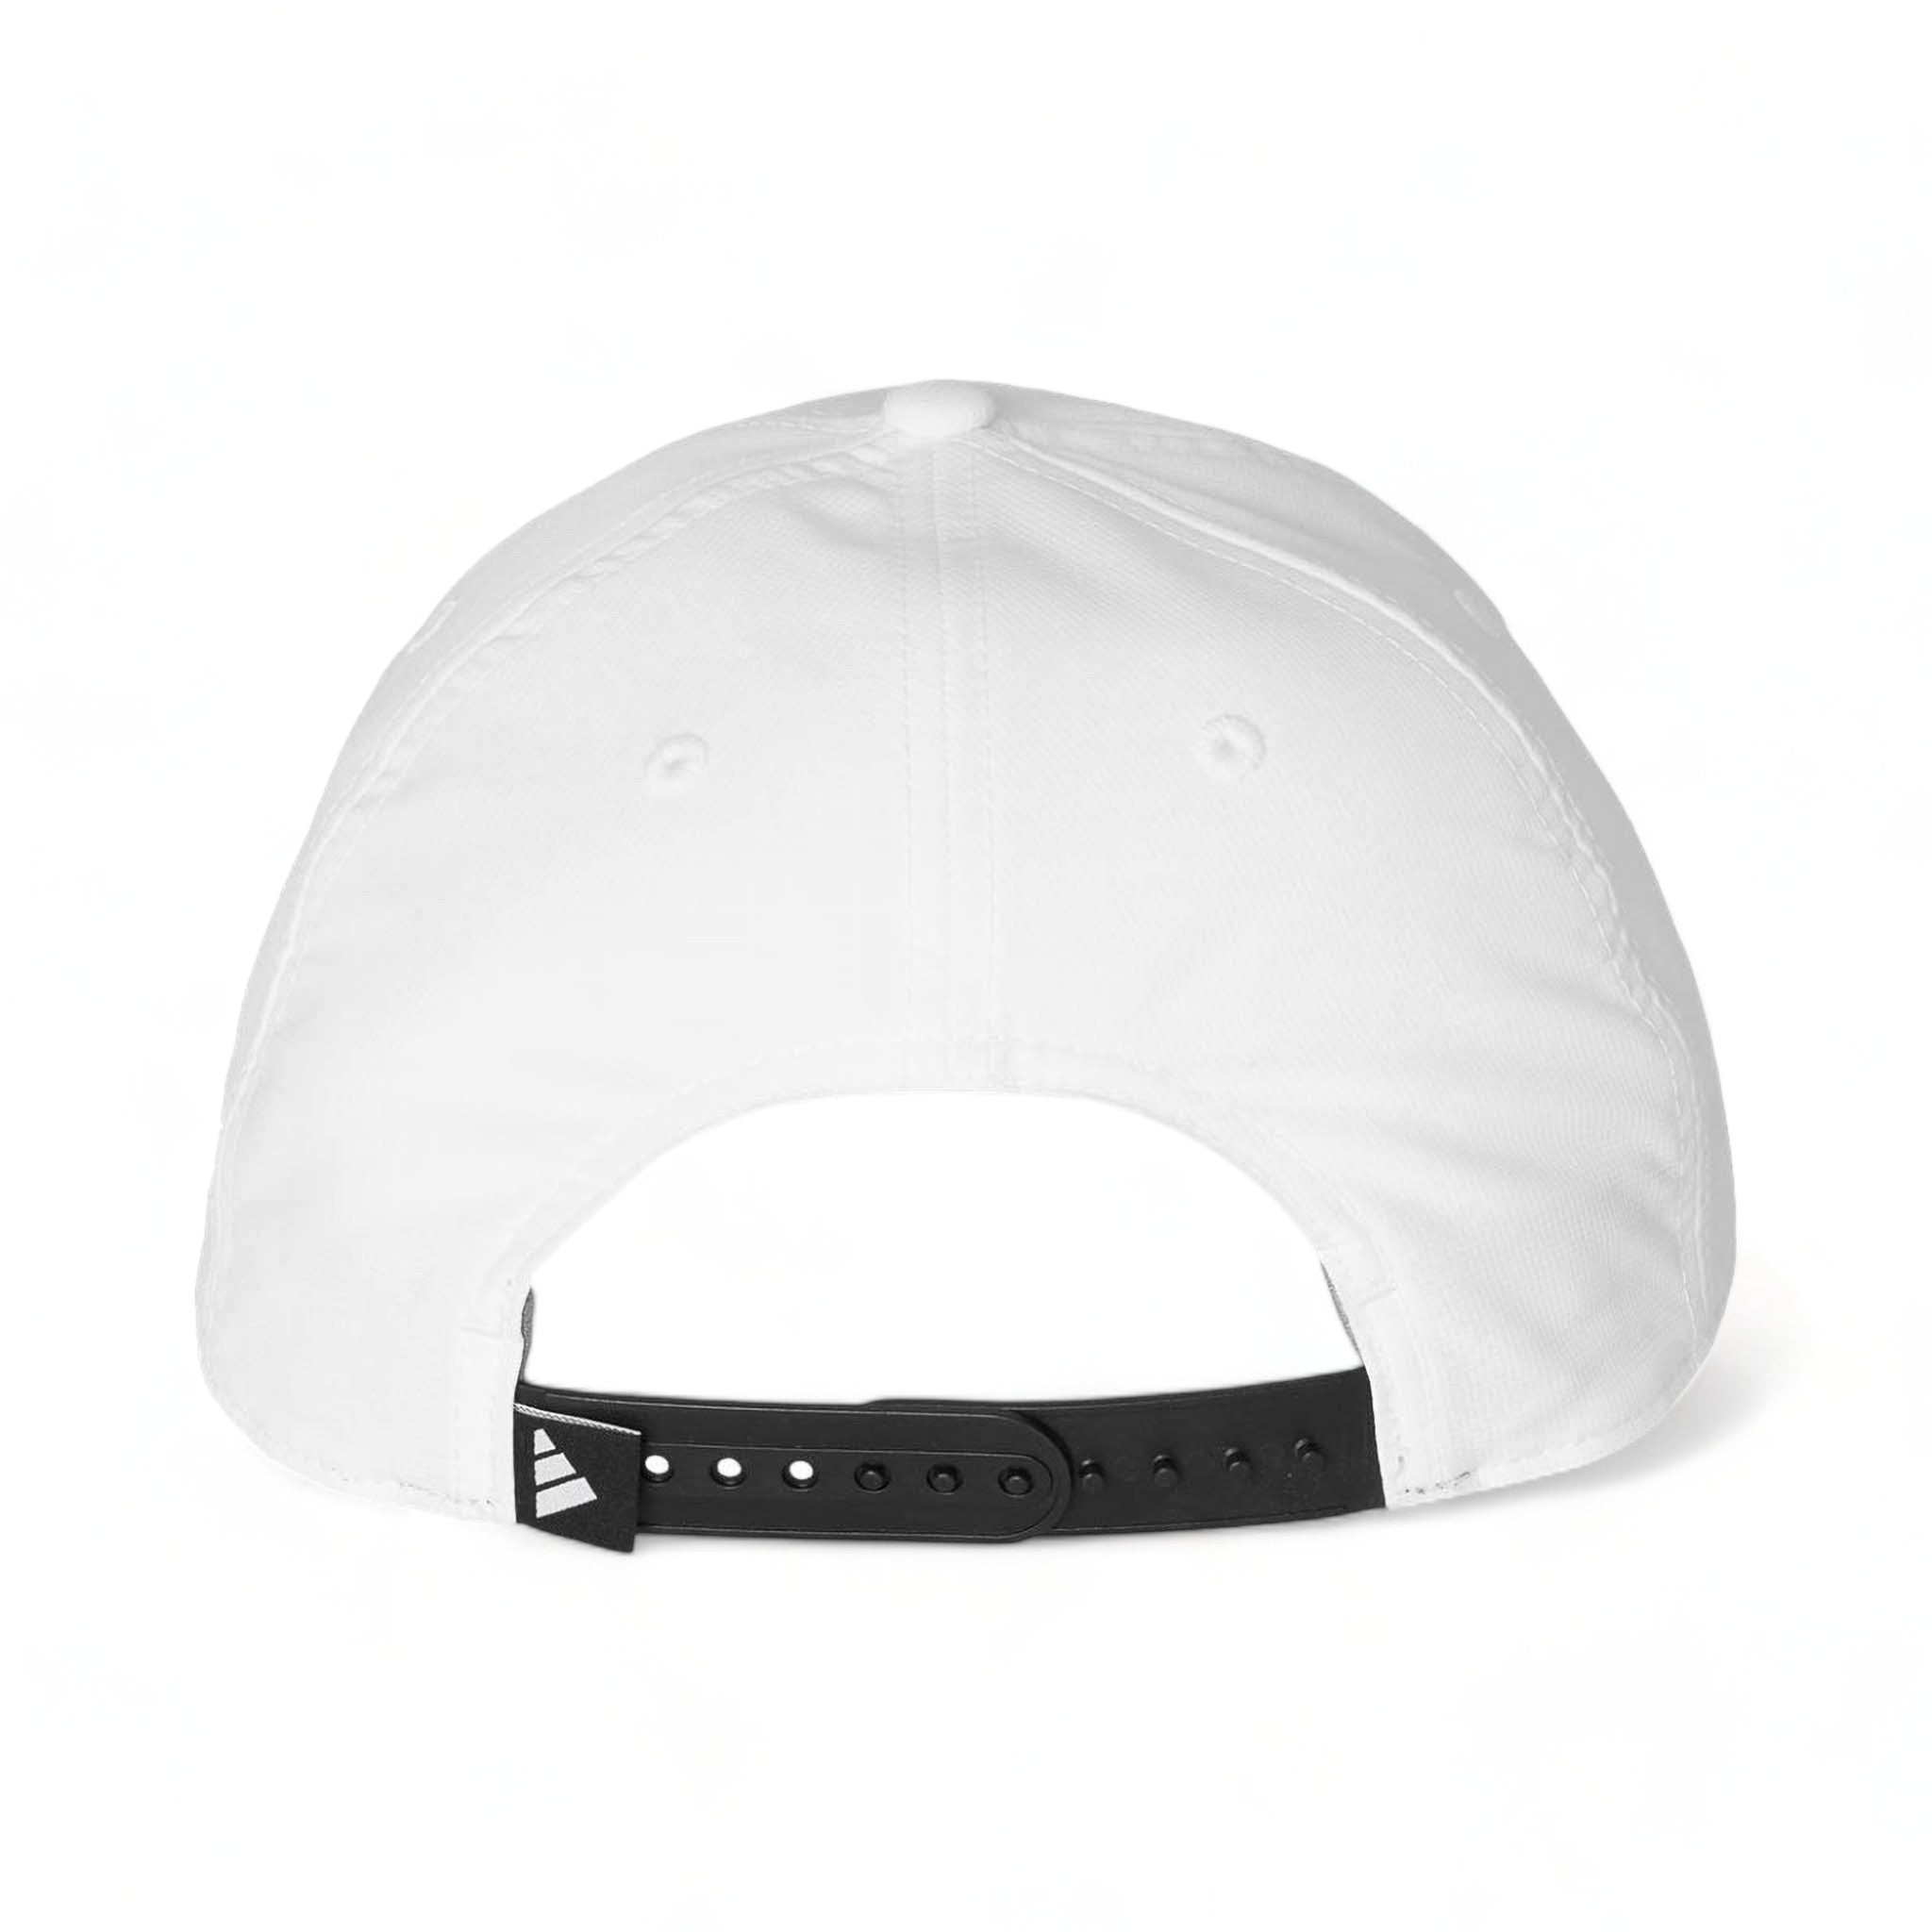 Back view of Adidas A605S custom hat in white